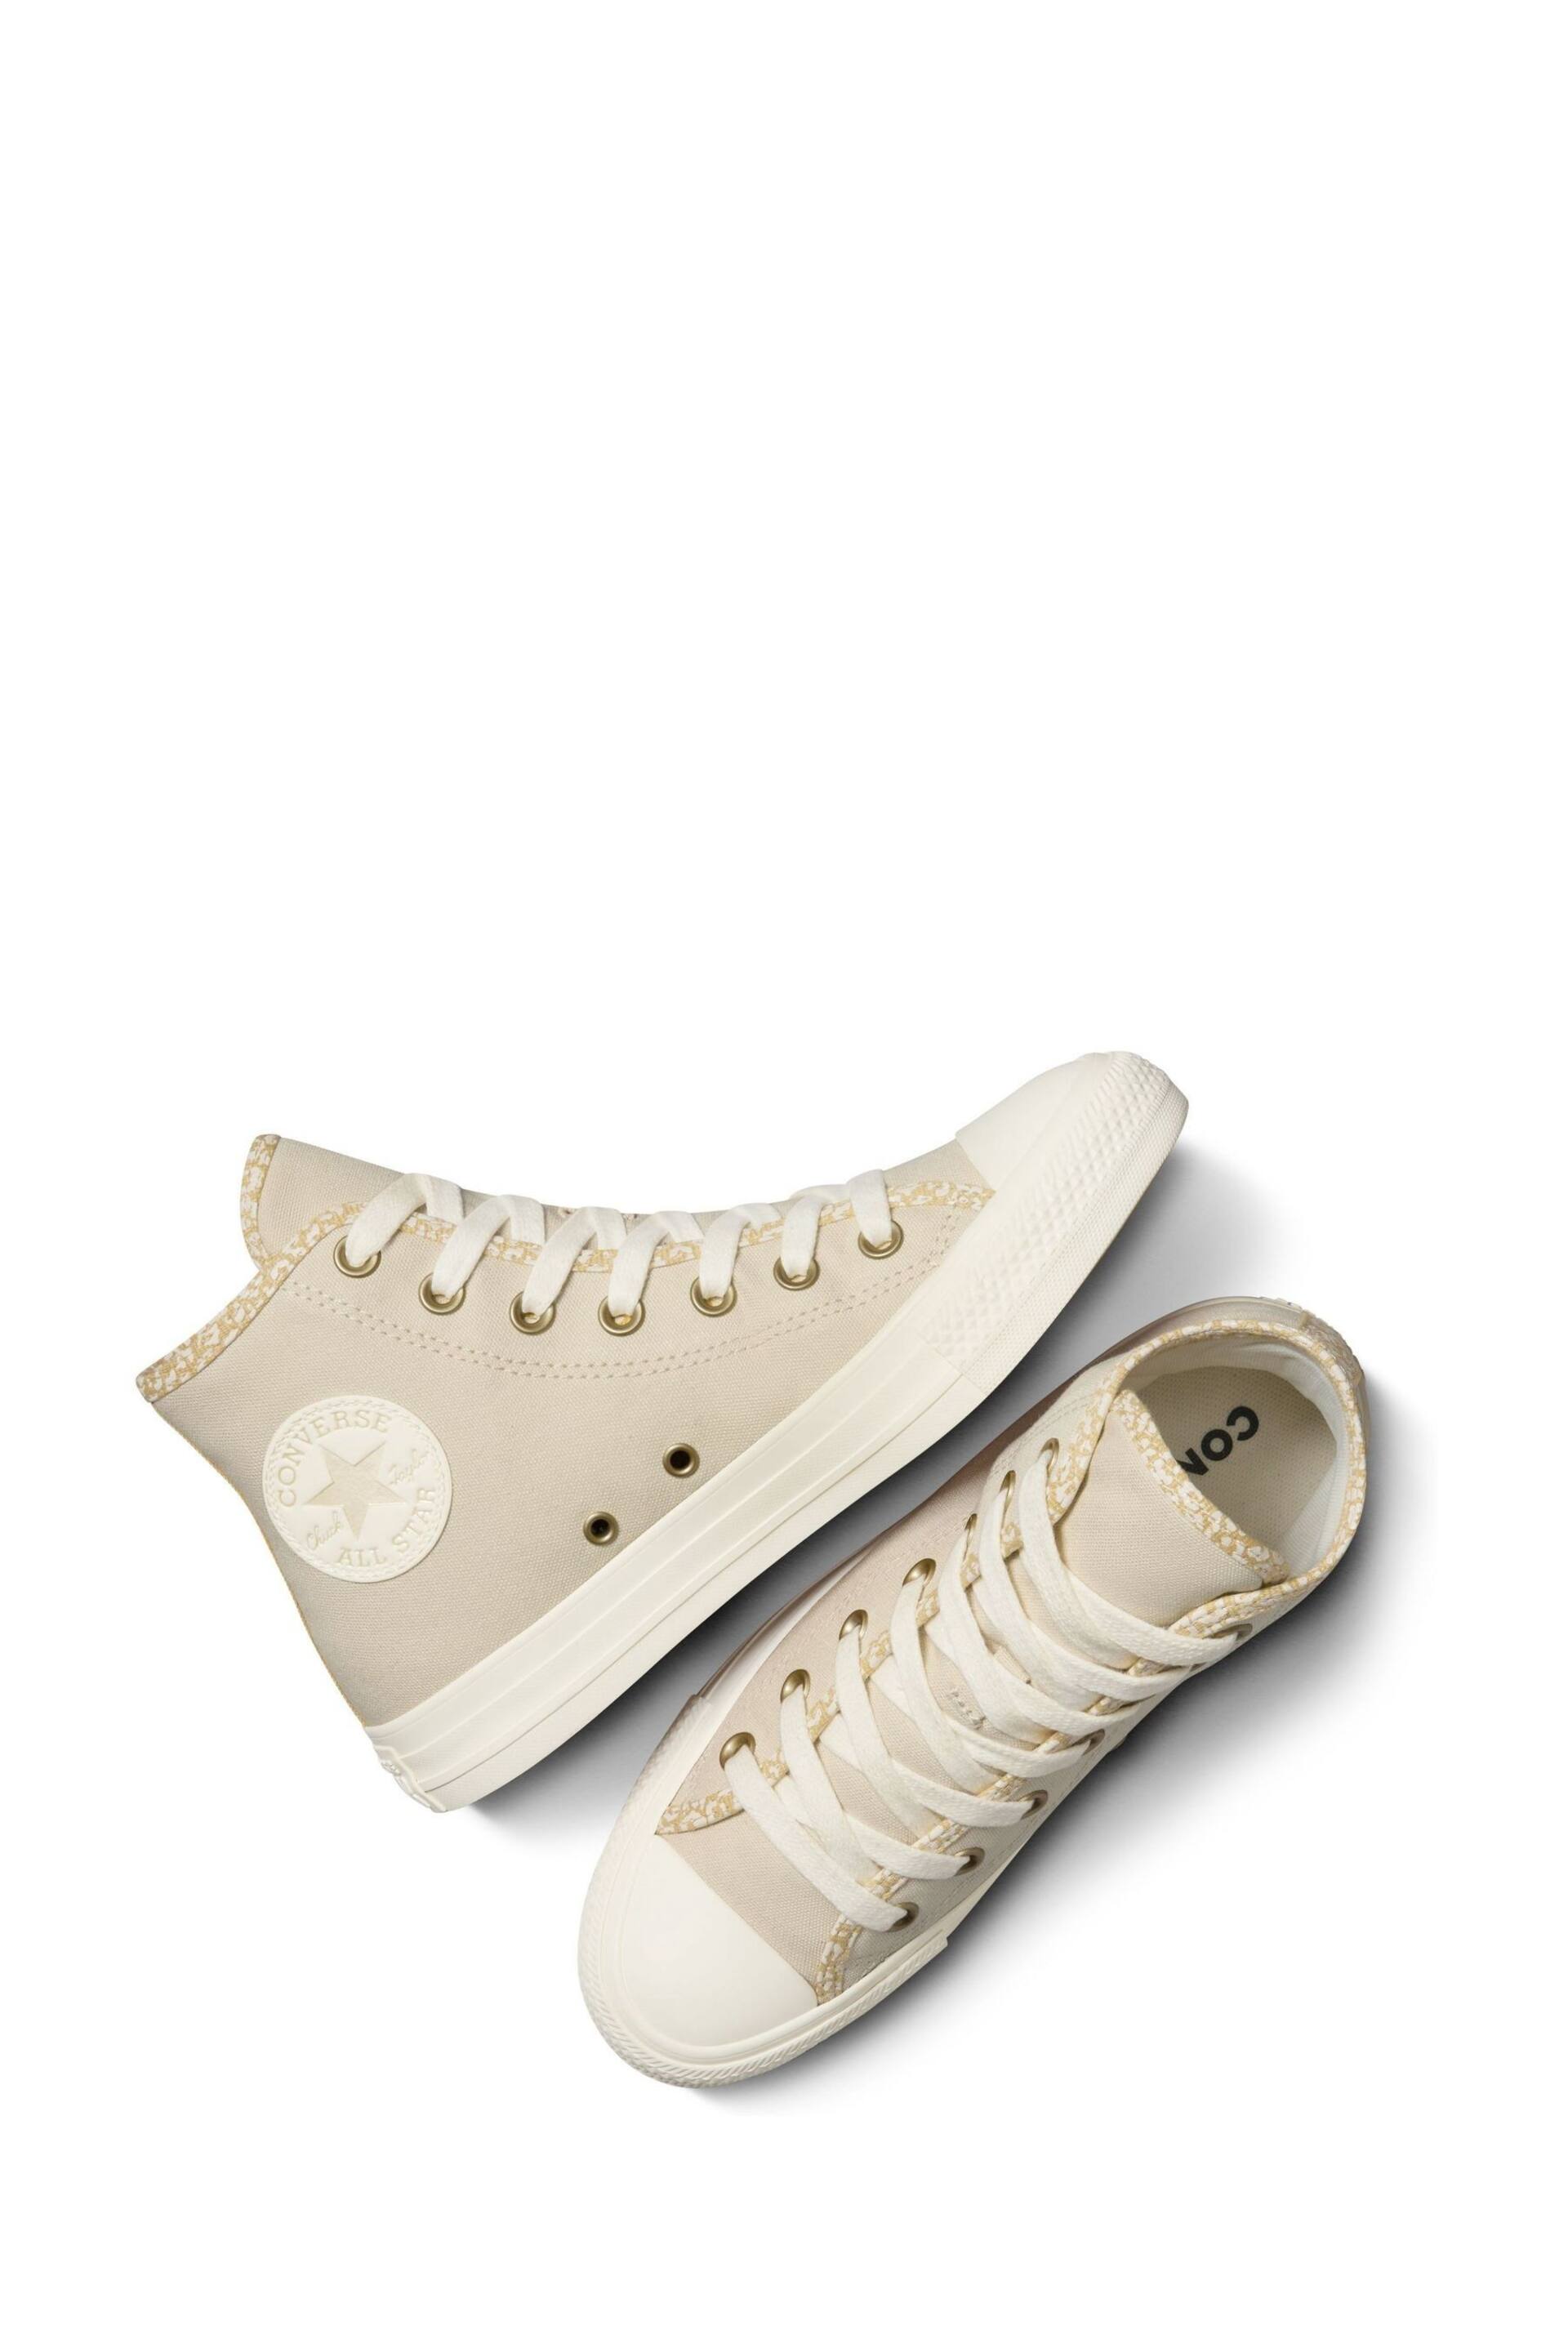 Converse Beige Chuck Taylor All Star High Top Trainers - Image 9 of 12